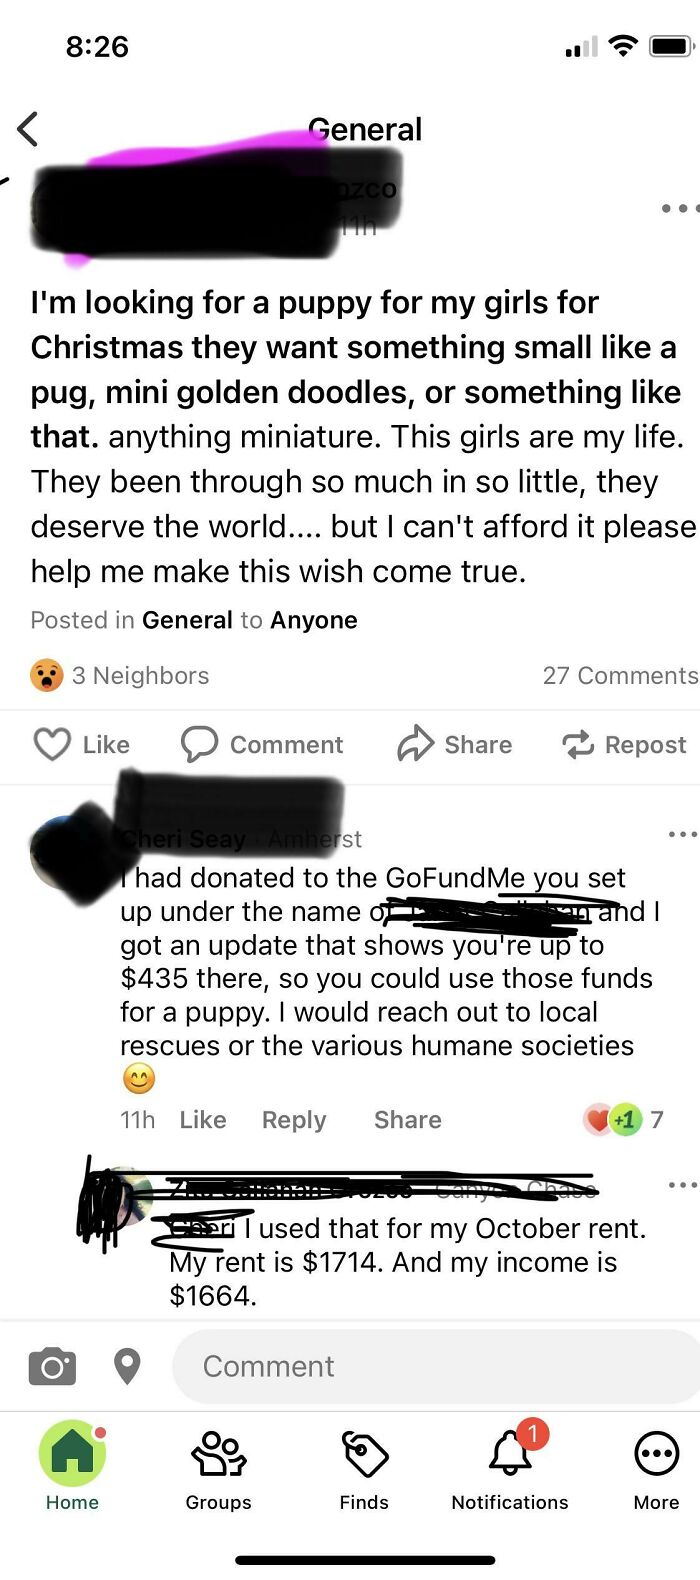 Has A Gofundme Under An Alias For Rent And Now Wants A Free Puppy?